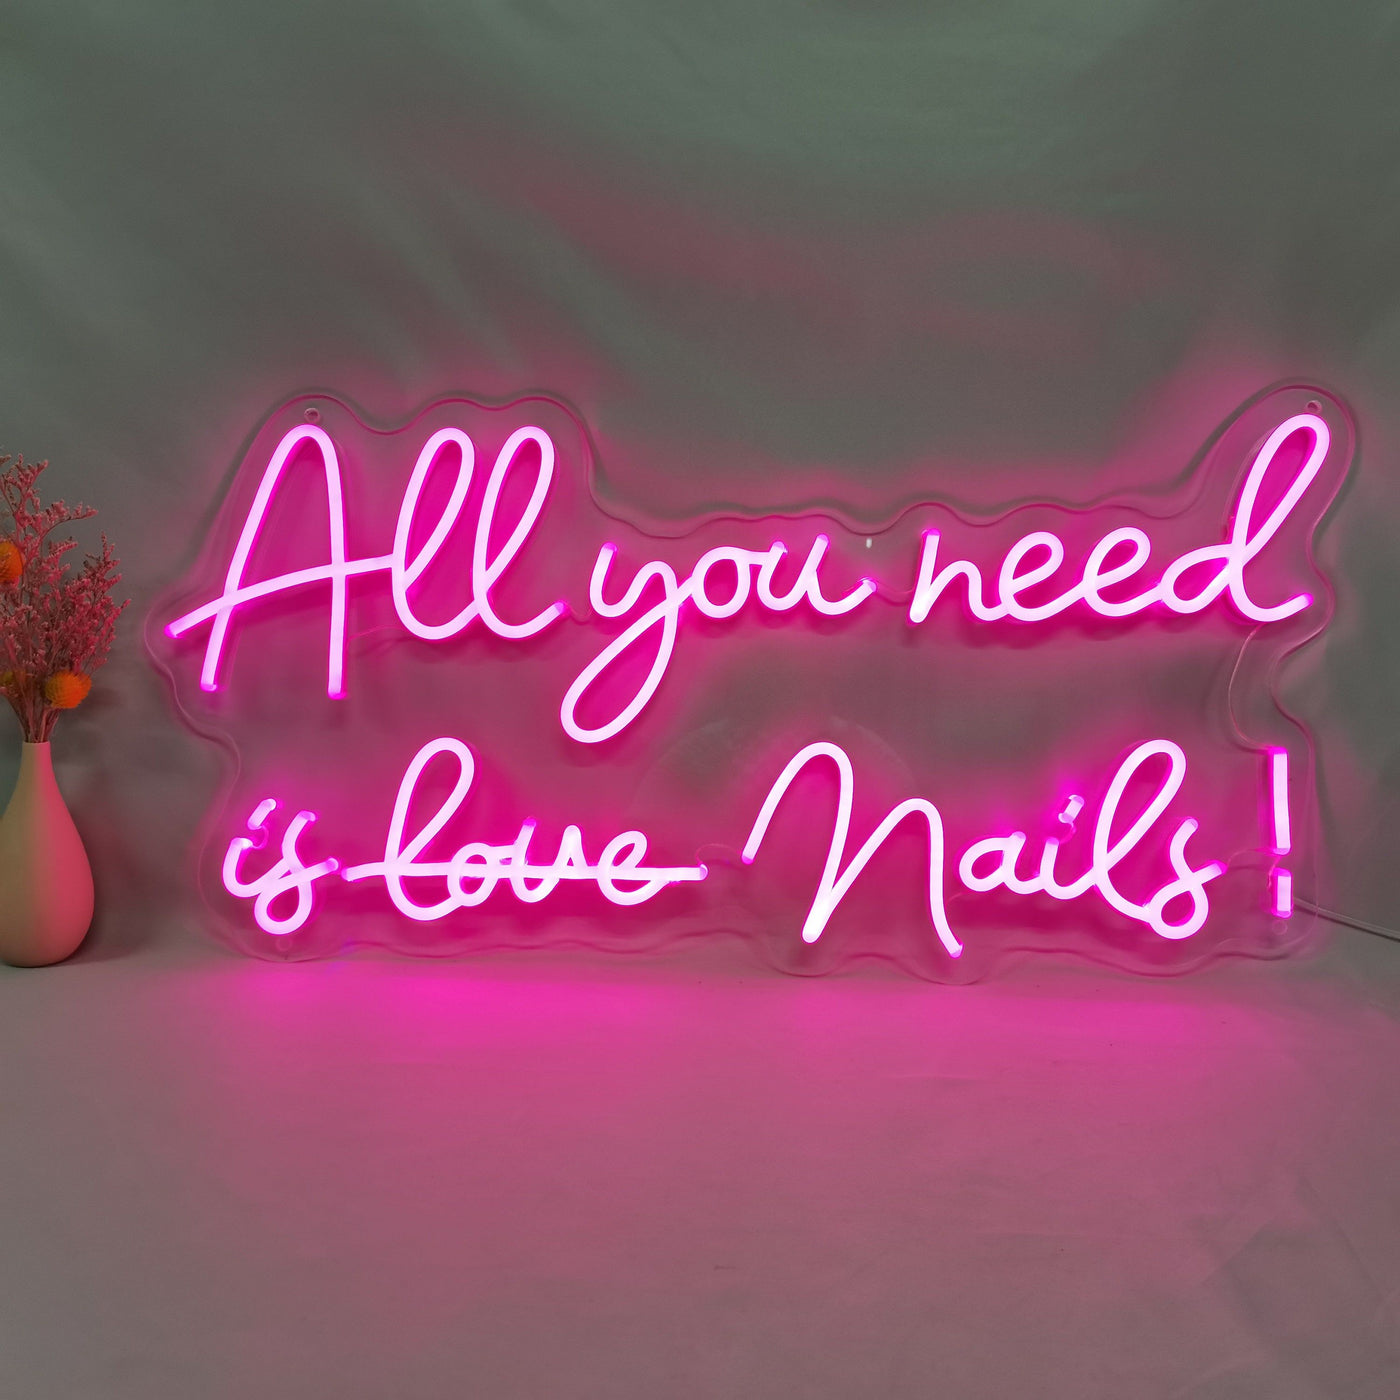 All you need is love nails